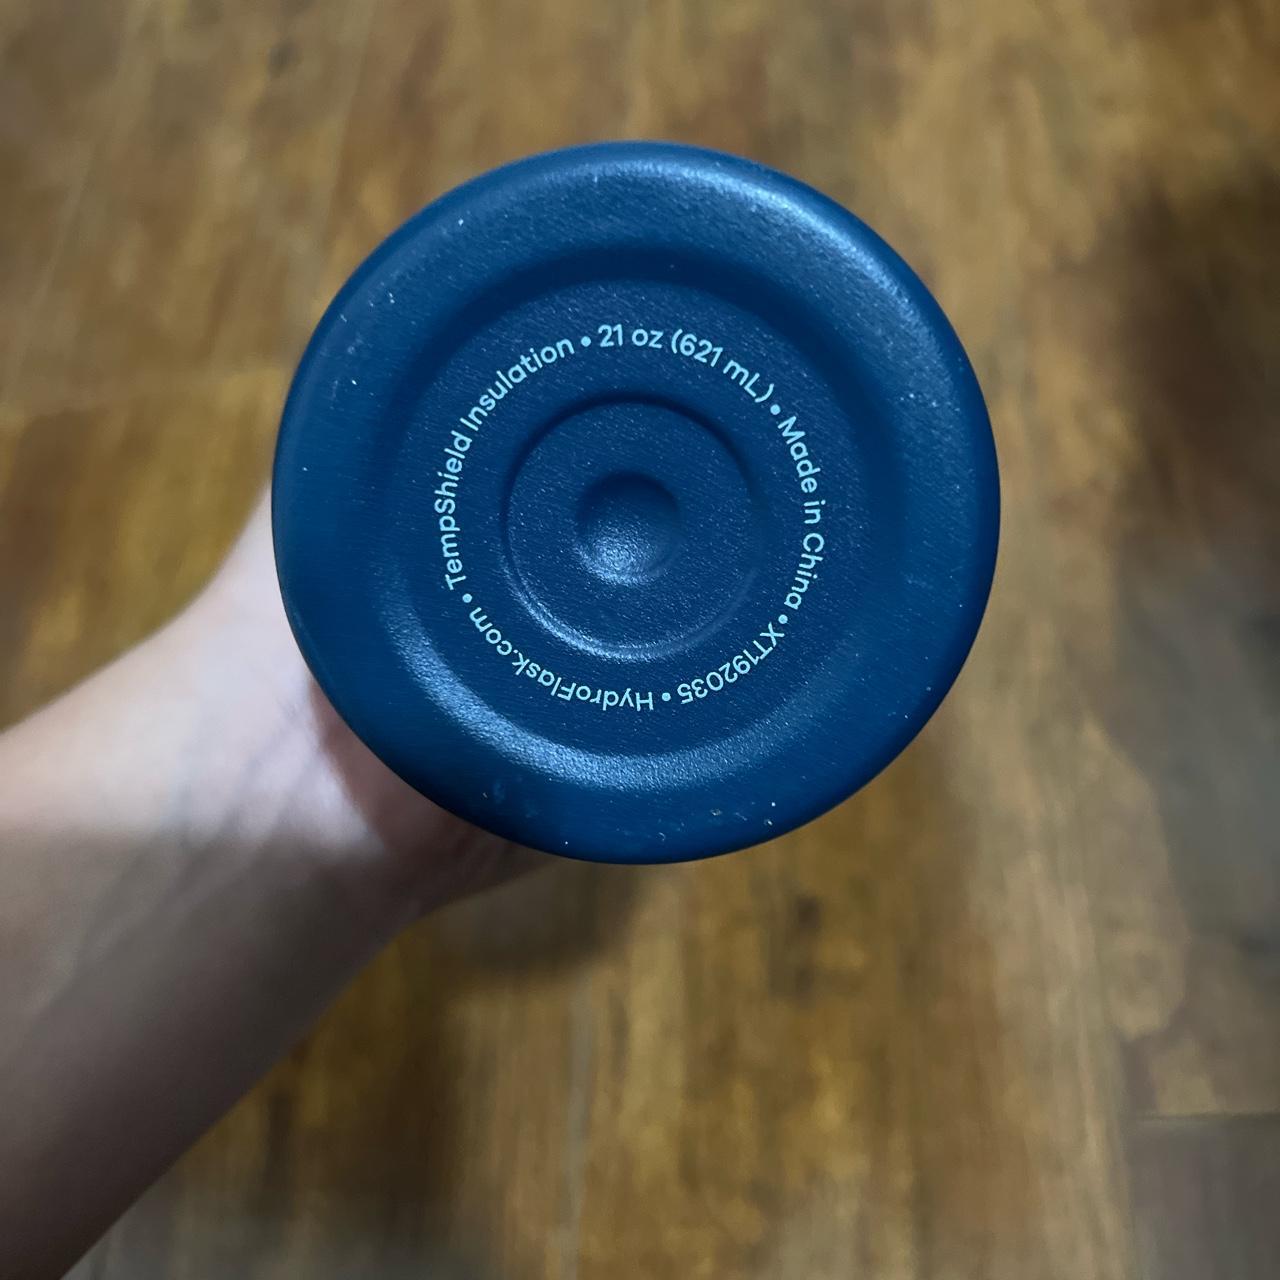 Baby sky blue hydro flask, fair condition, flaws as - Depop